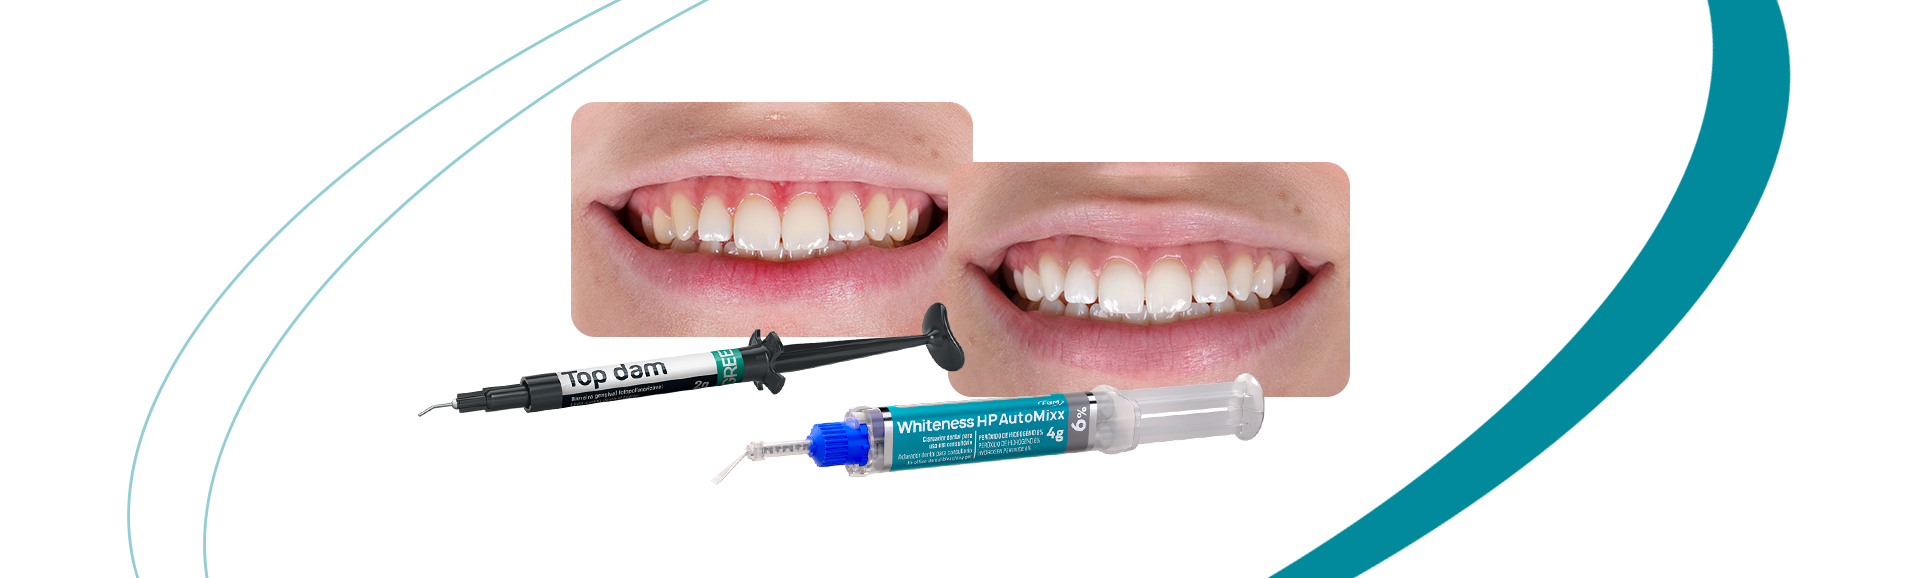 Capa clareamento automixx6 jovem - In-office whitening with Whiteness HP Automixx 6% with brush tip